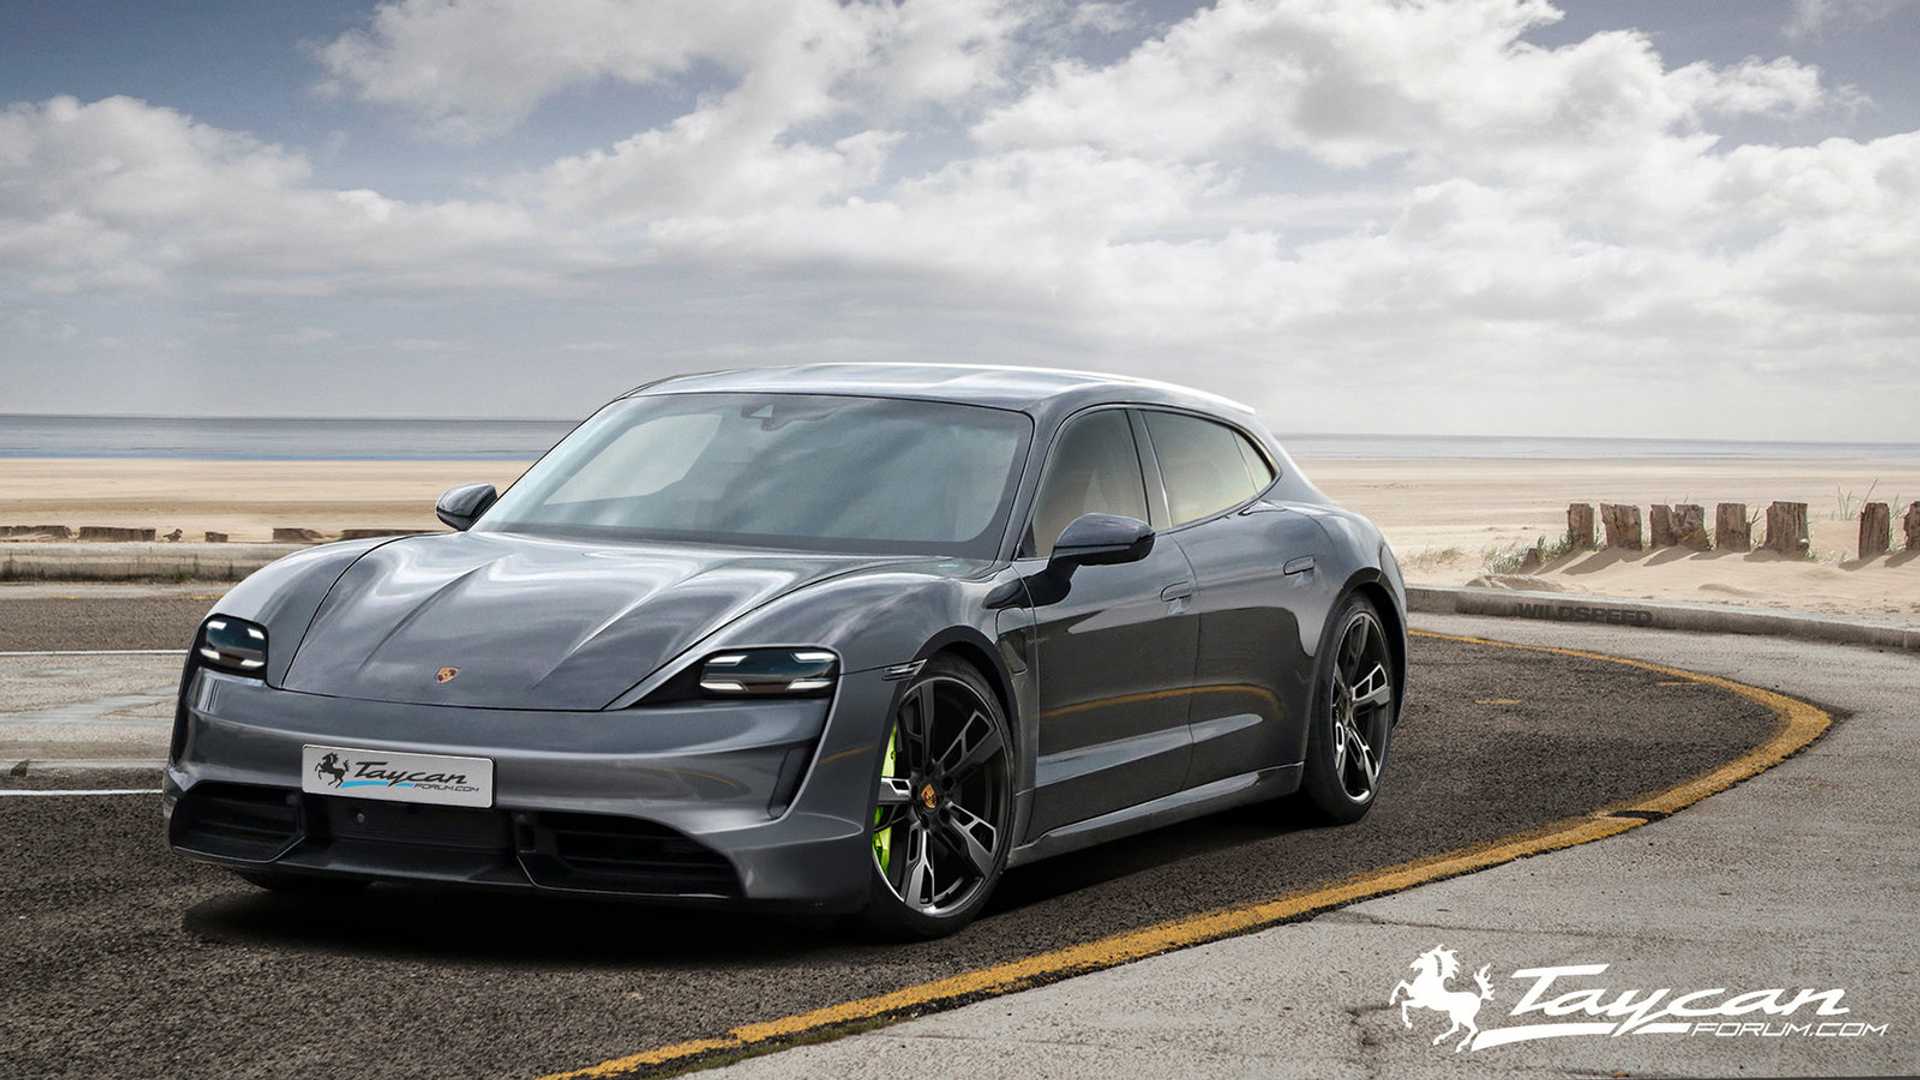 Porsche Taycan Electric Range Distance You Can Drive In Hours